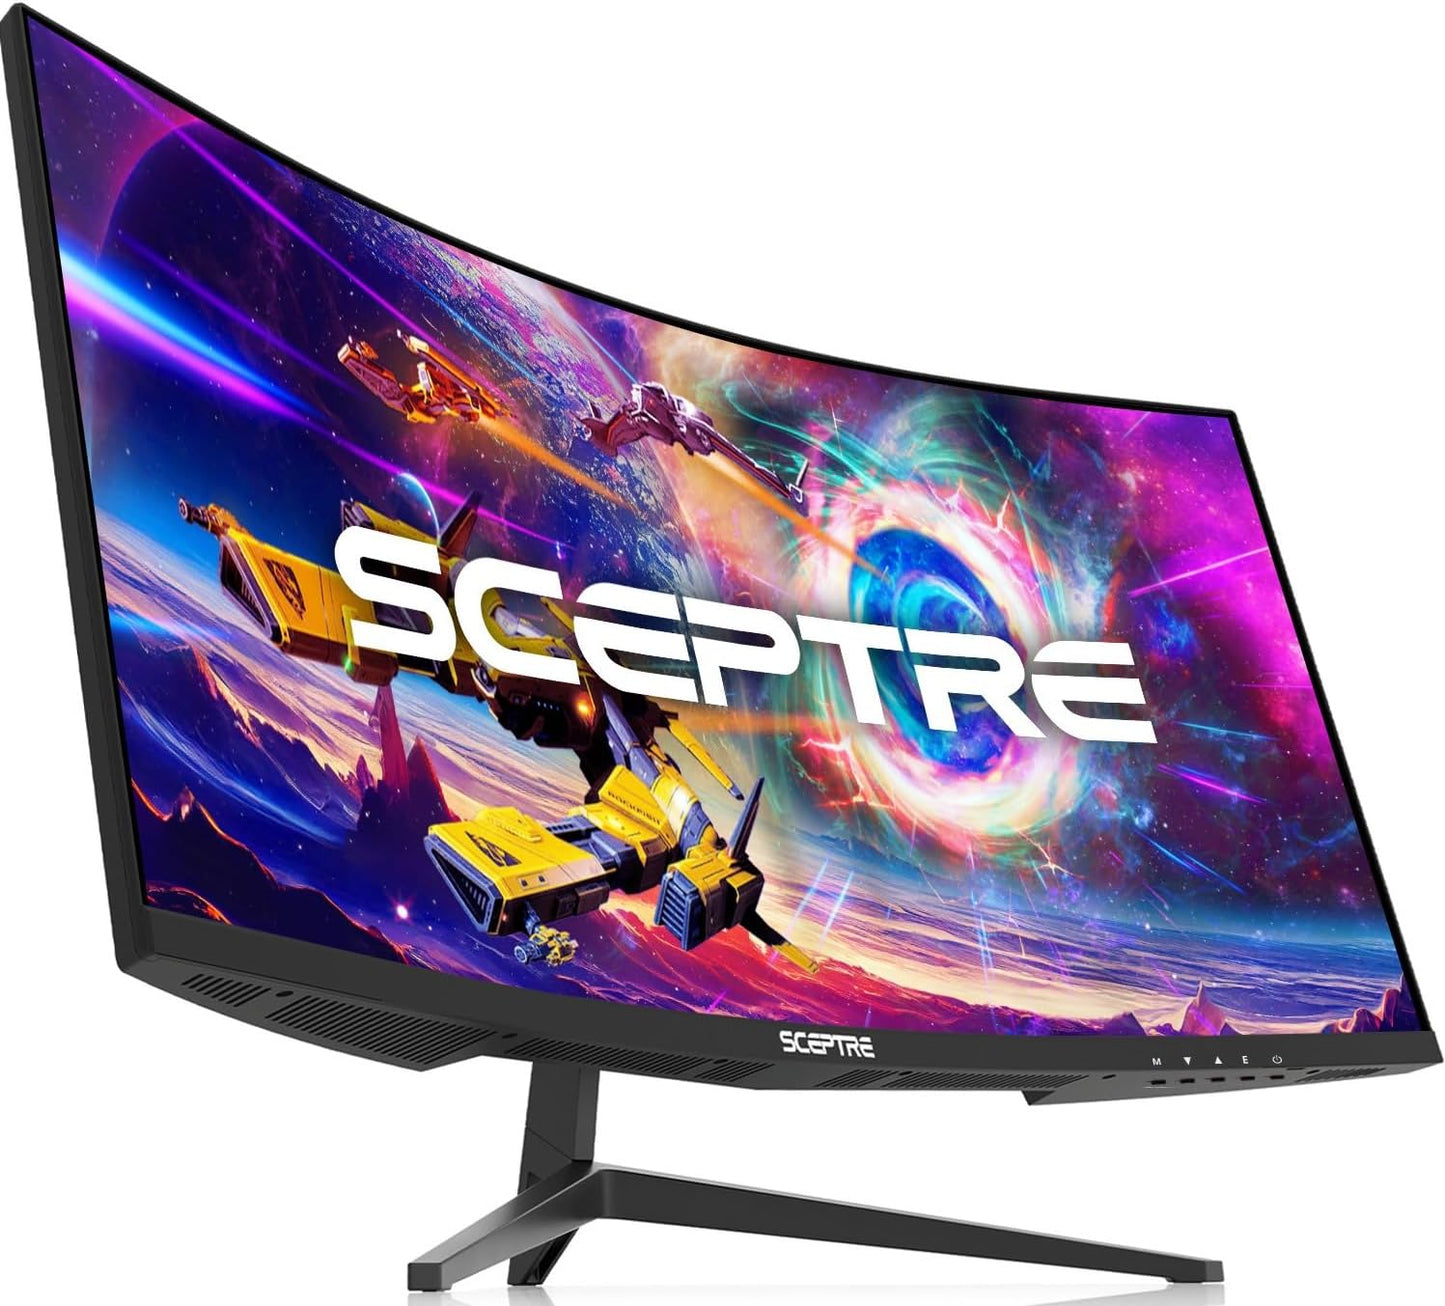 30-Inch Curved Gaming Monitor 21:9 2560X1080 Ultra Wide/ Slim HDMI Displayport up to 200Hz Build-In Speakers, Metal Black (C305B-200UN1)